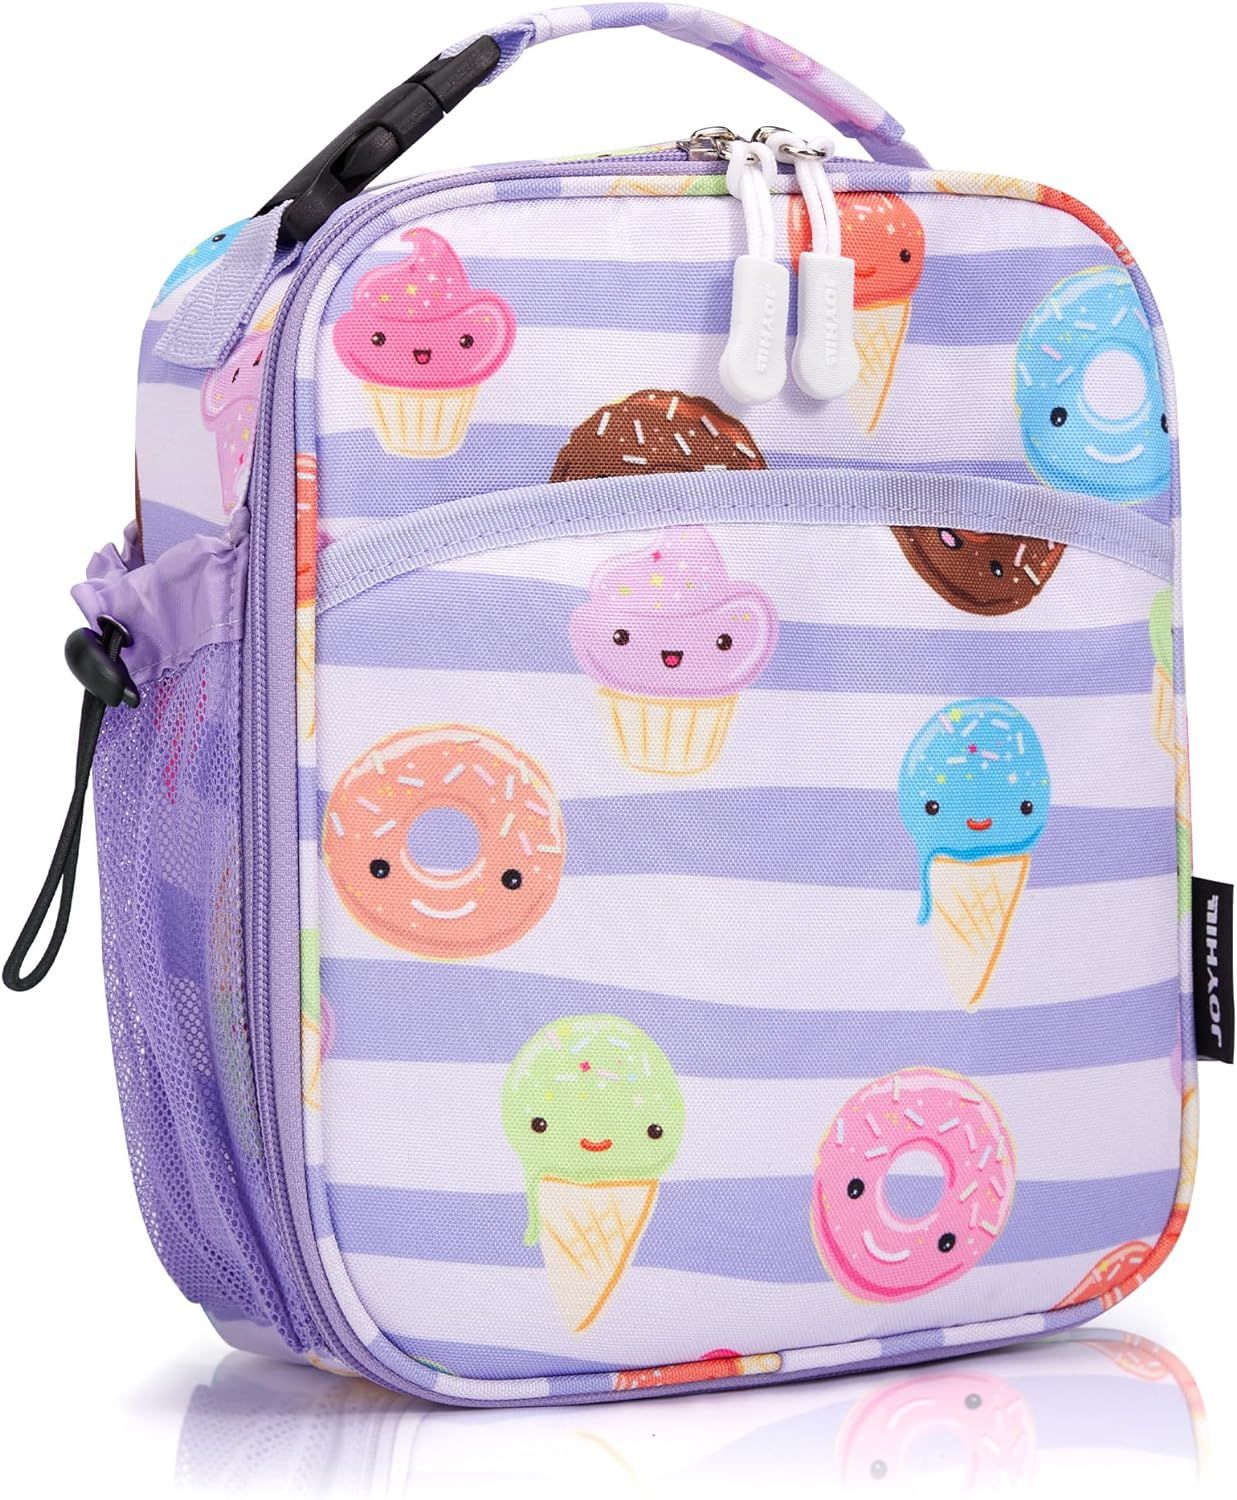 10 Adorable Lunch Boxes for Kids - Savvy Sassy Moms